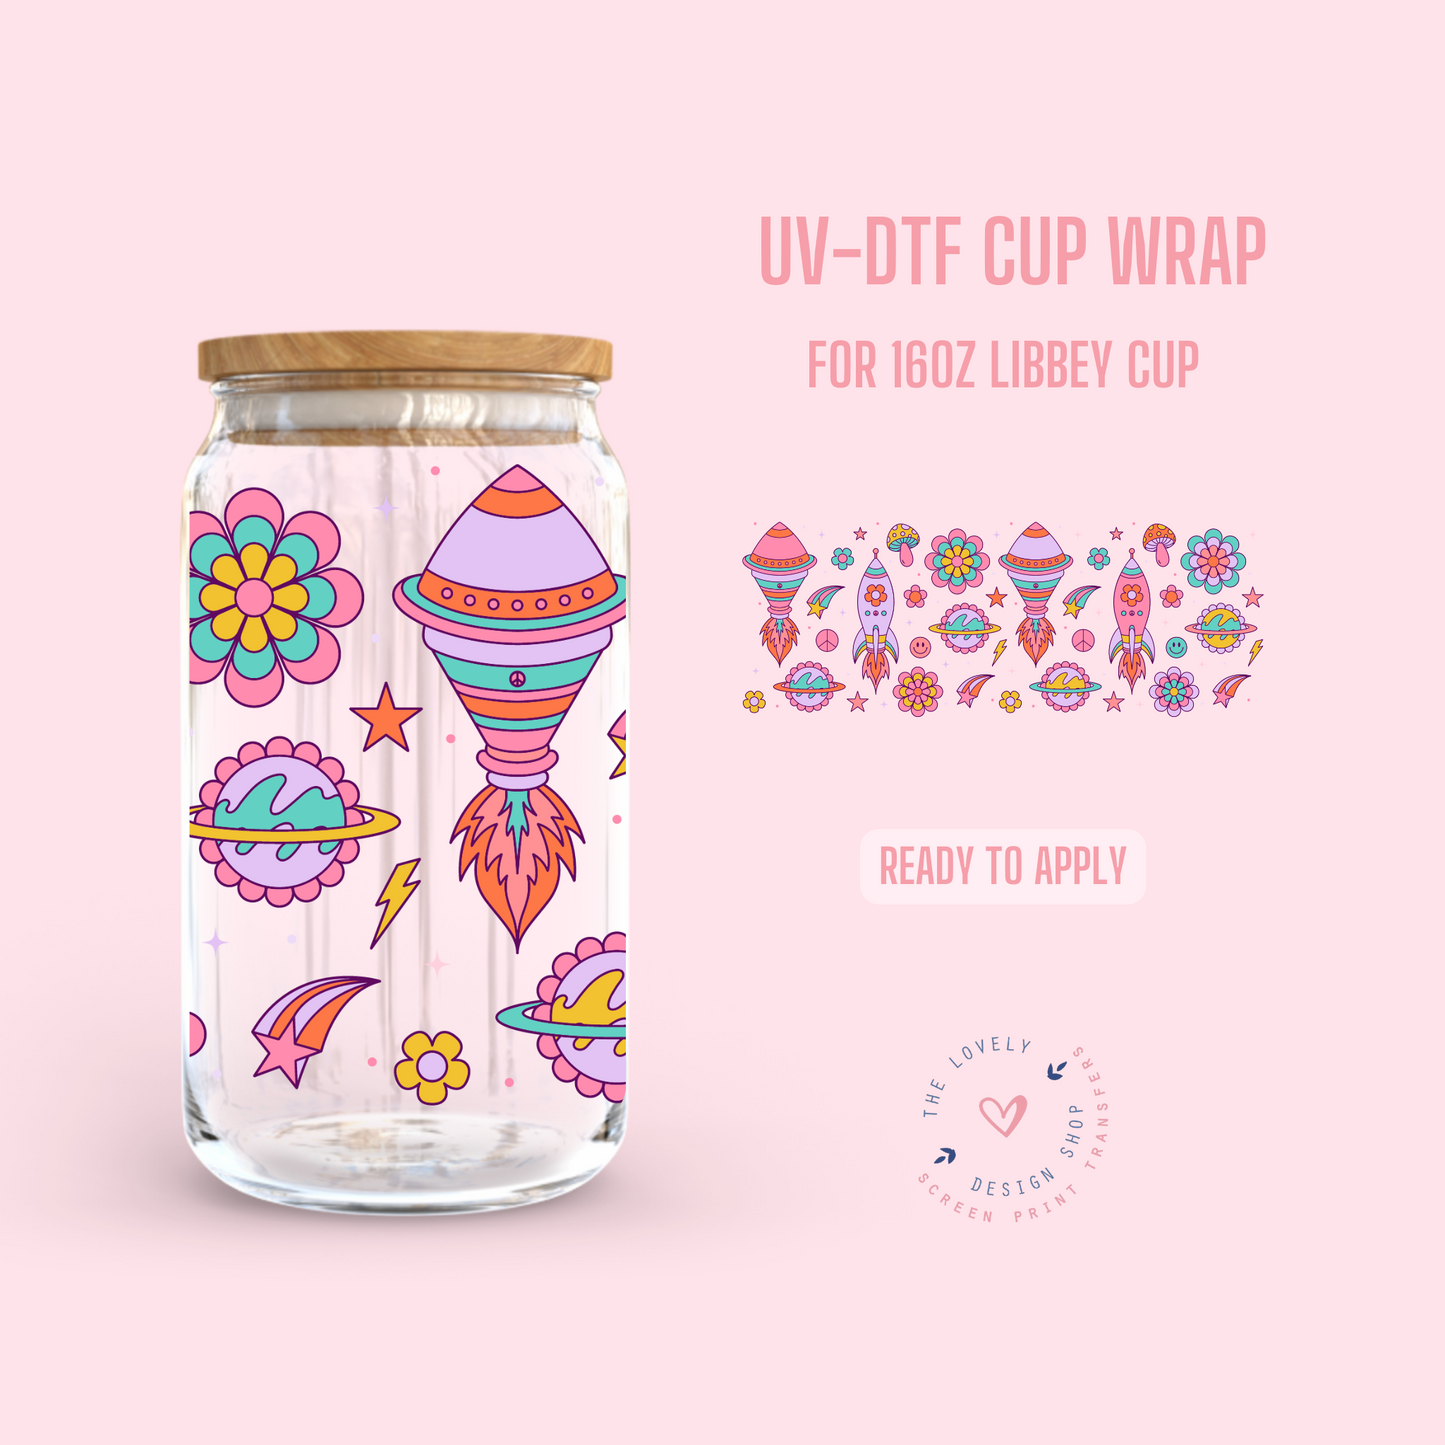 Give Me Space - UV DTF 16 oz Libbey Cup Wrap (Ready to Ship) Apr 1